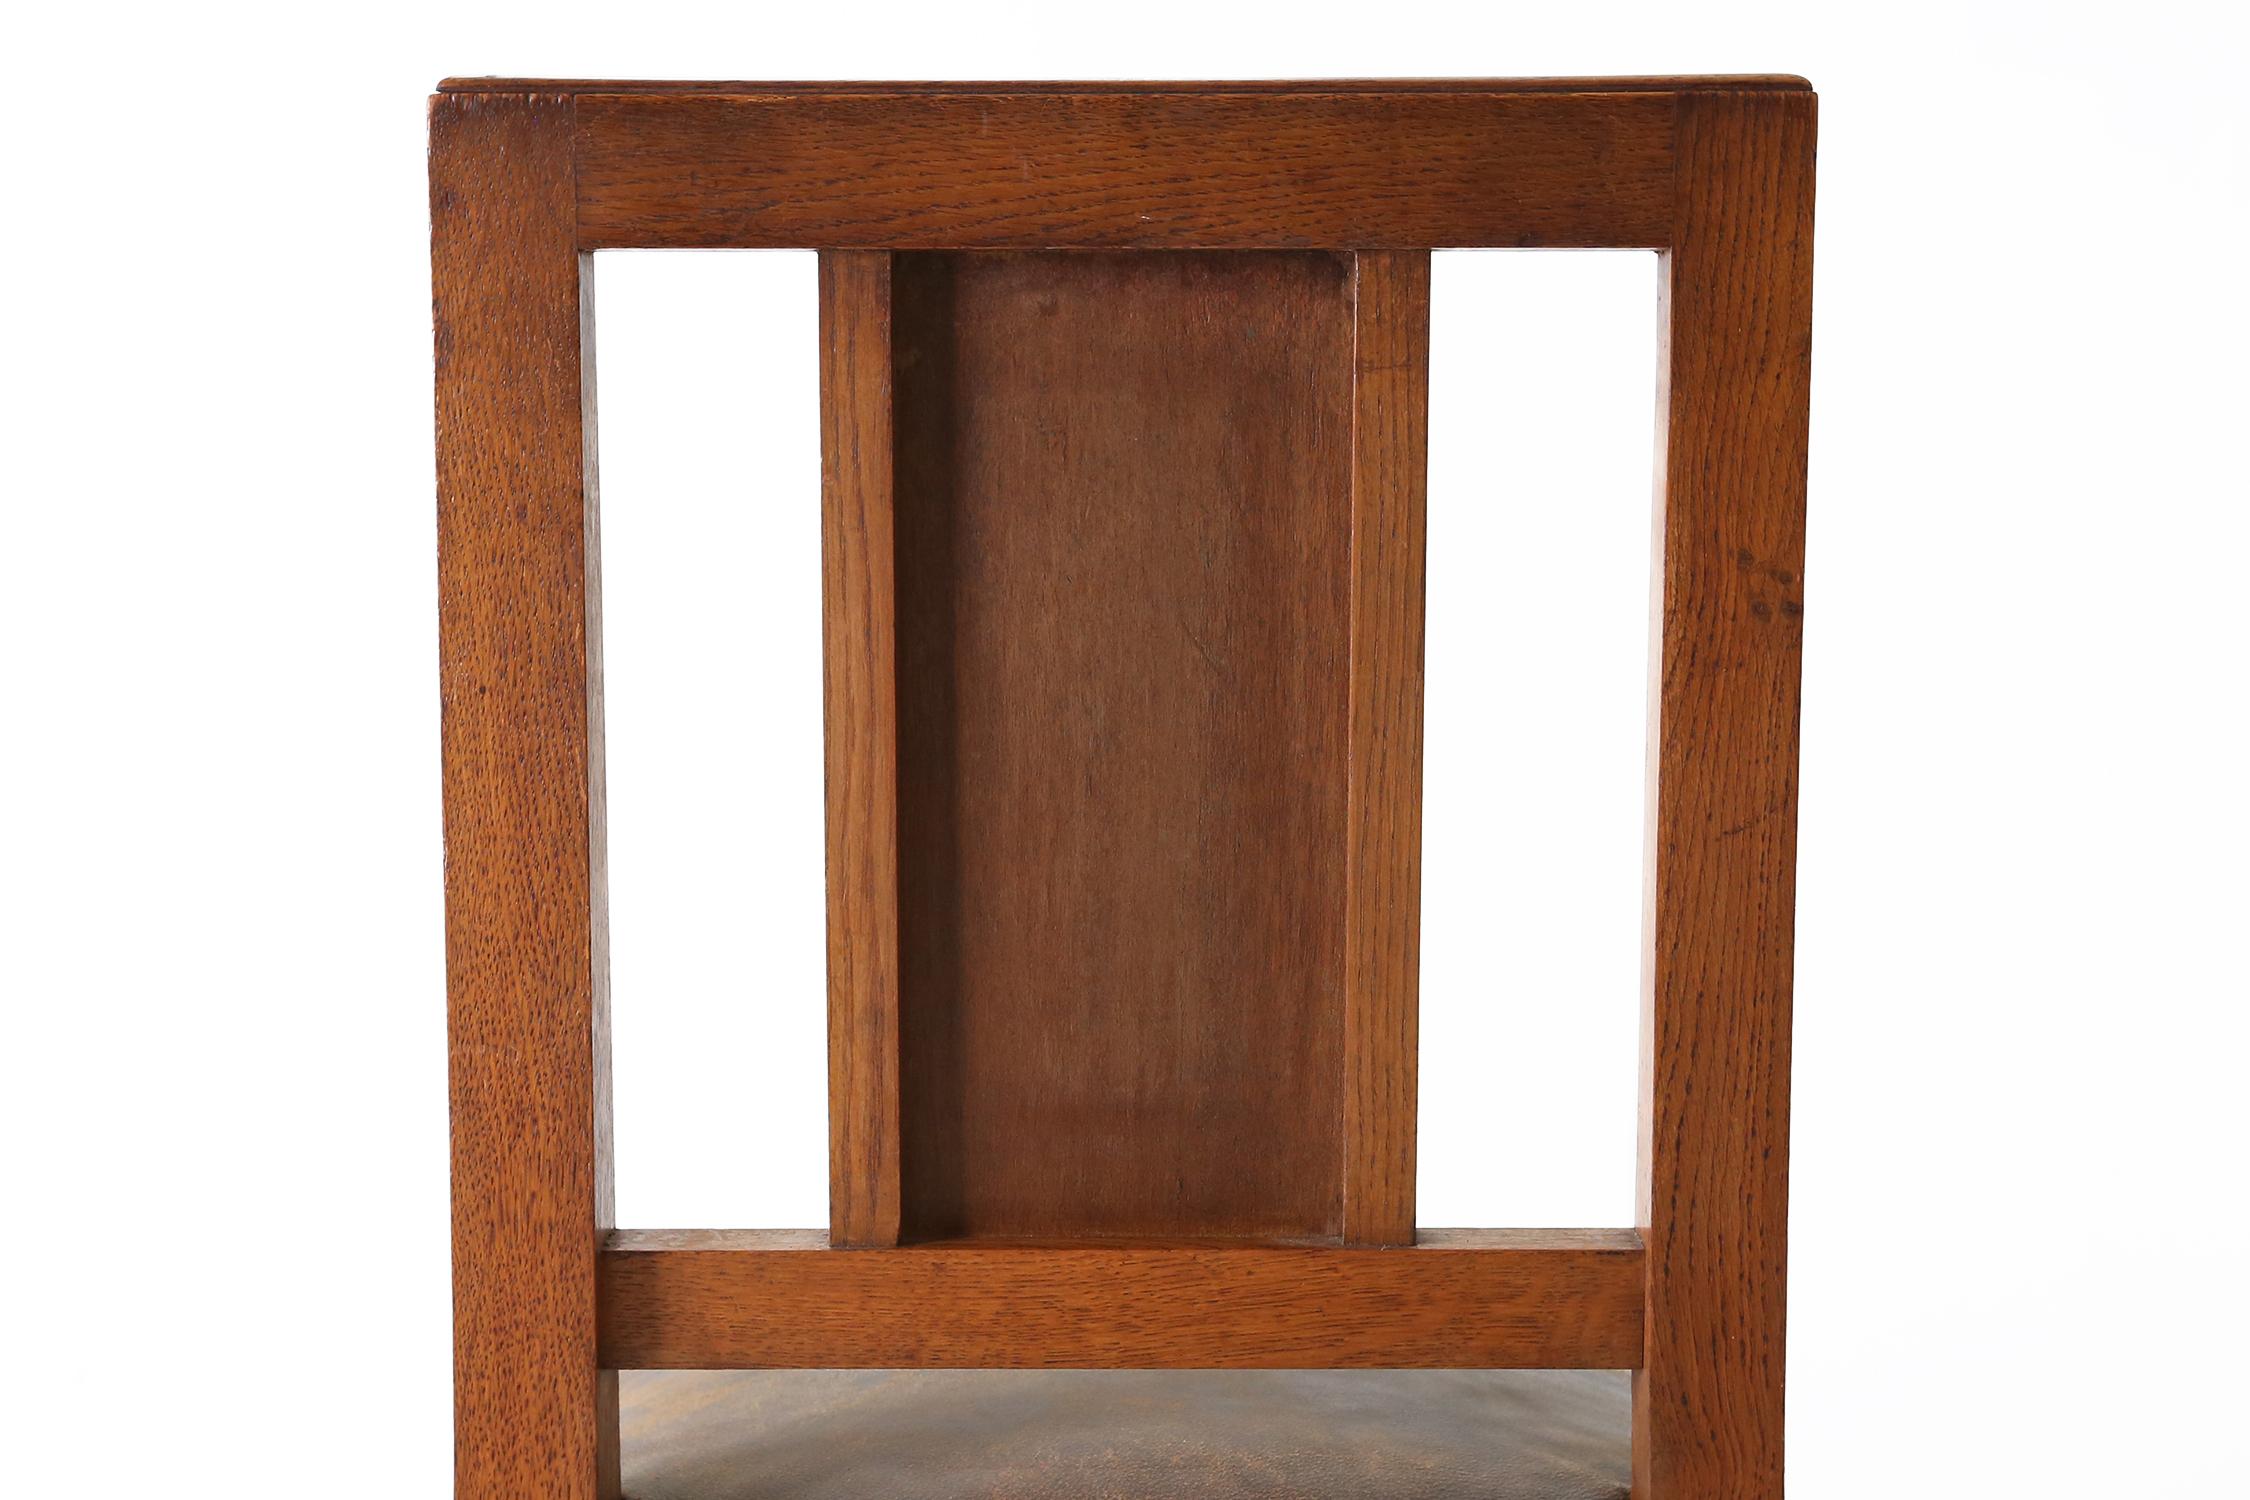 Early 20th Century Art Deco Chair by Maurice Dufrene, 1925 For Sale